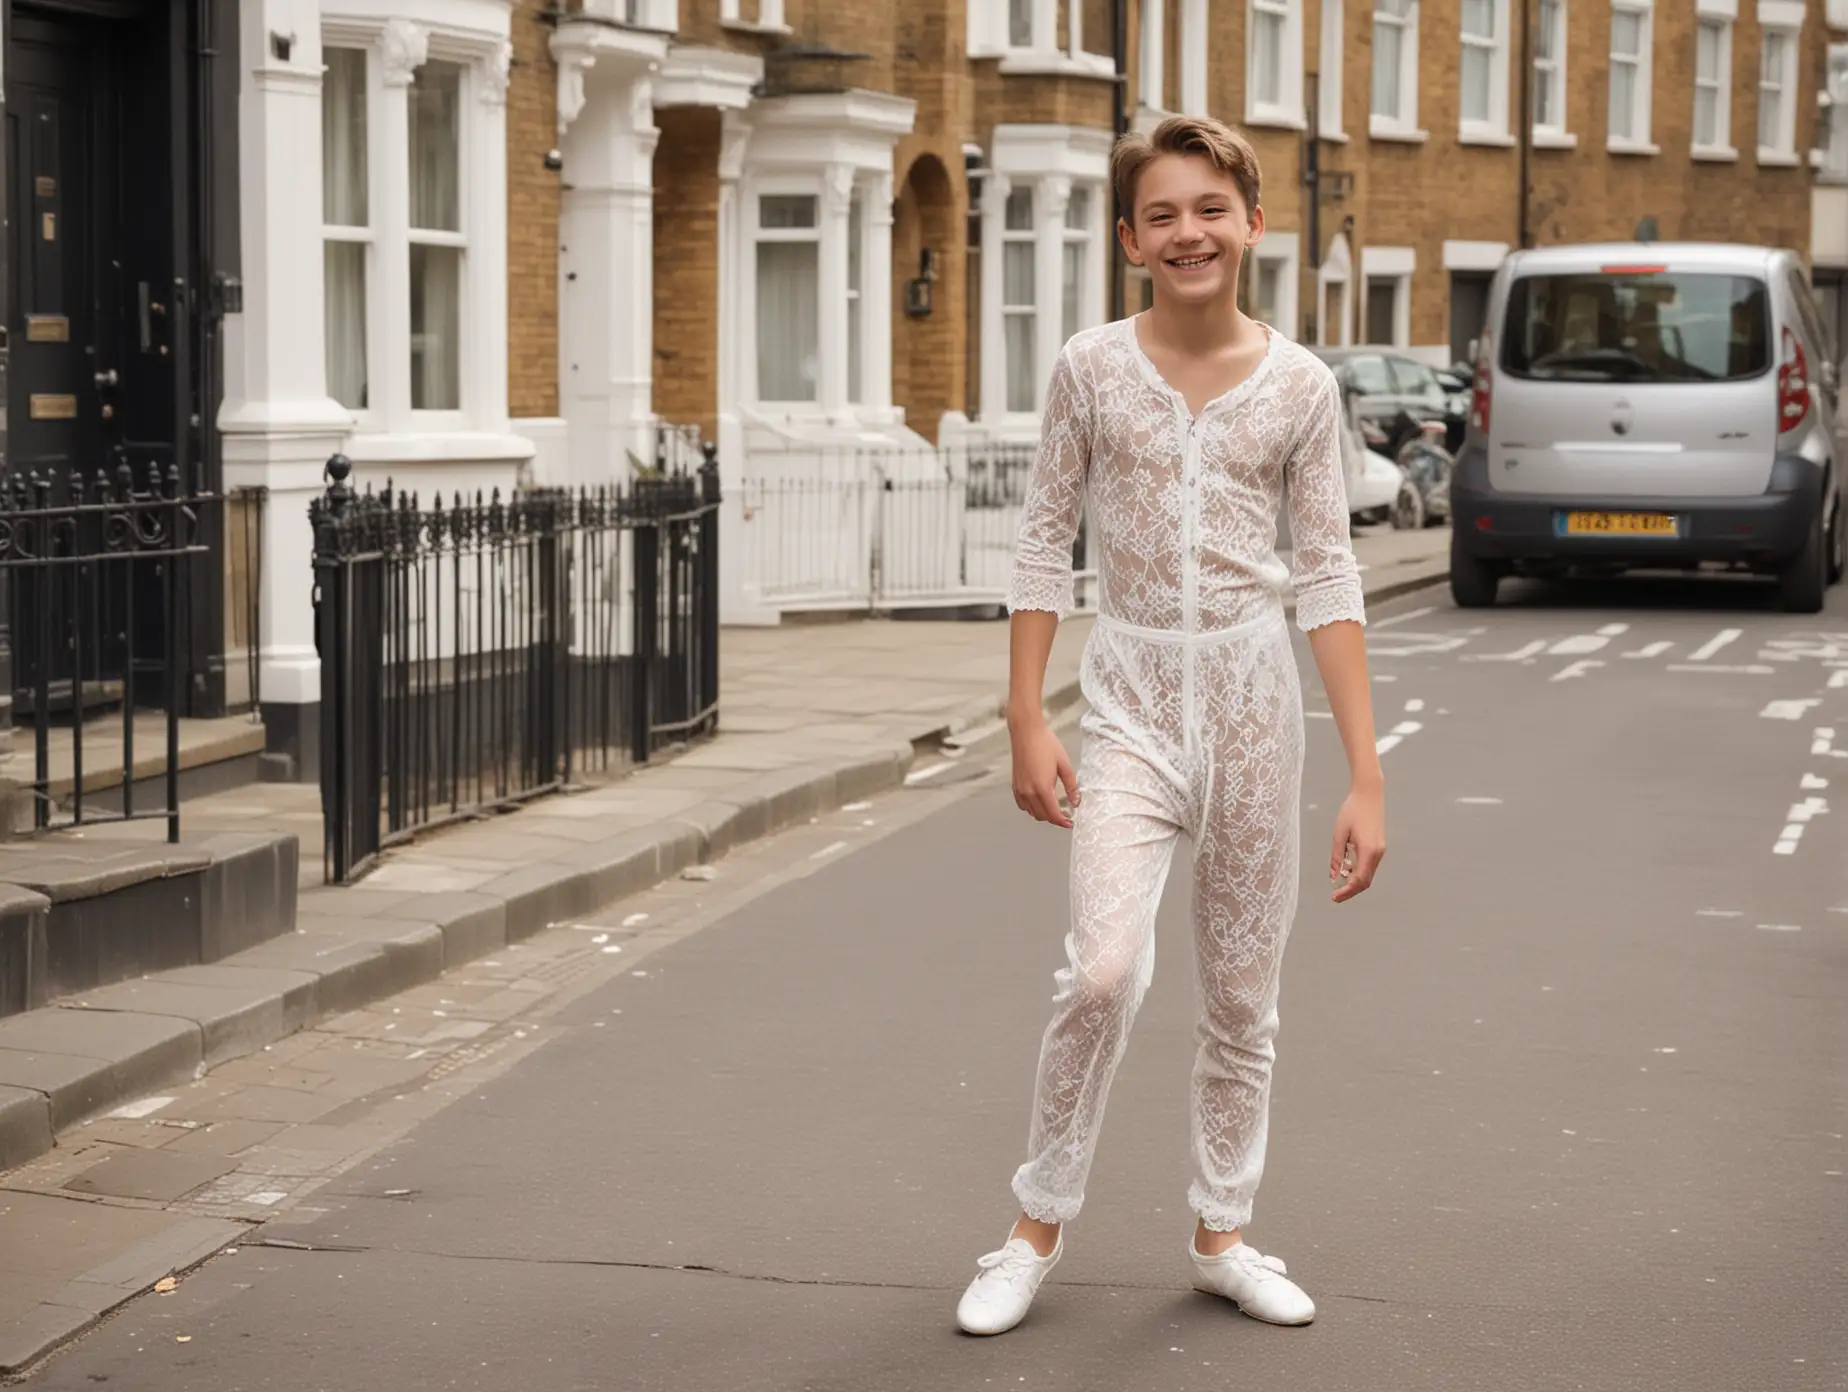 thin 14 year old boy in skin-tight white lace jumpsuit.  white ballet shoes.  smiling at camera in a London street